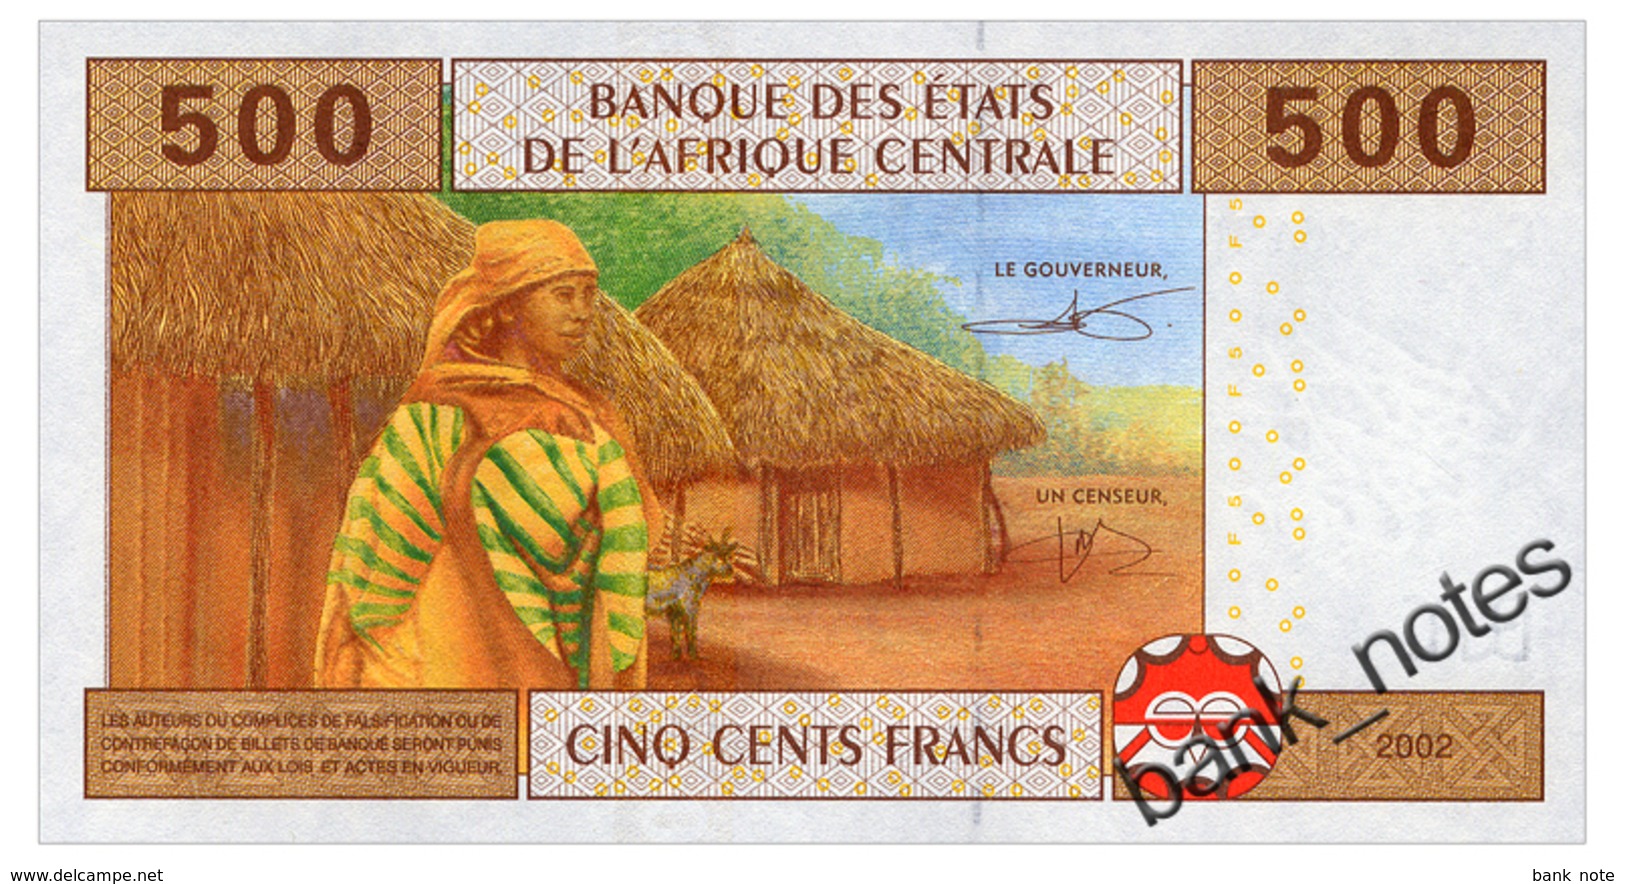 CENTRAL AFRICAN STATES 500 FRANCS 2016 CHAD ABAGA-NCHAMA - LOUIS ALEKA-RYBERT Pick 606Cc Unc - Central African States